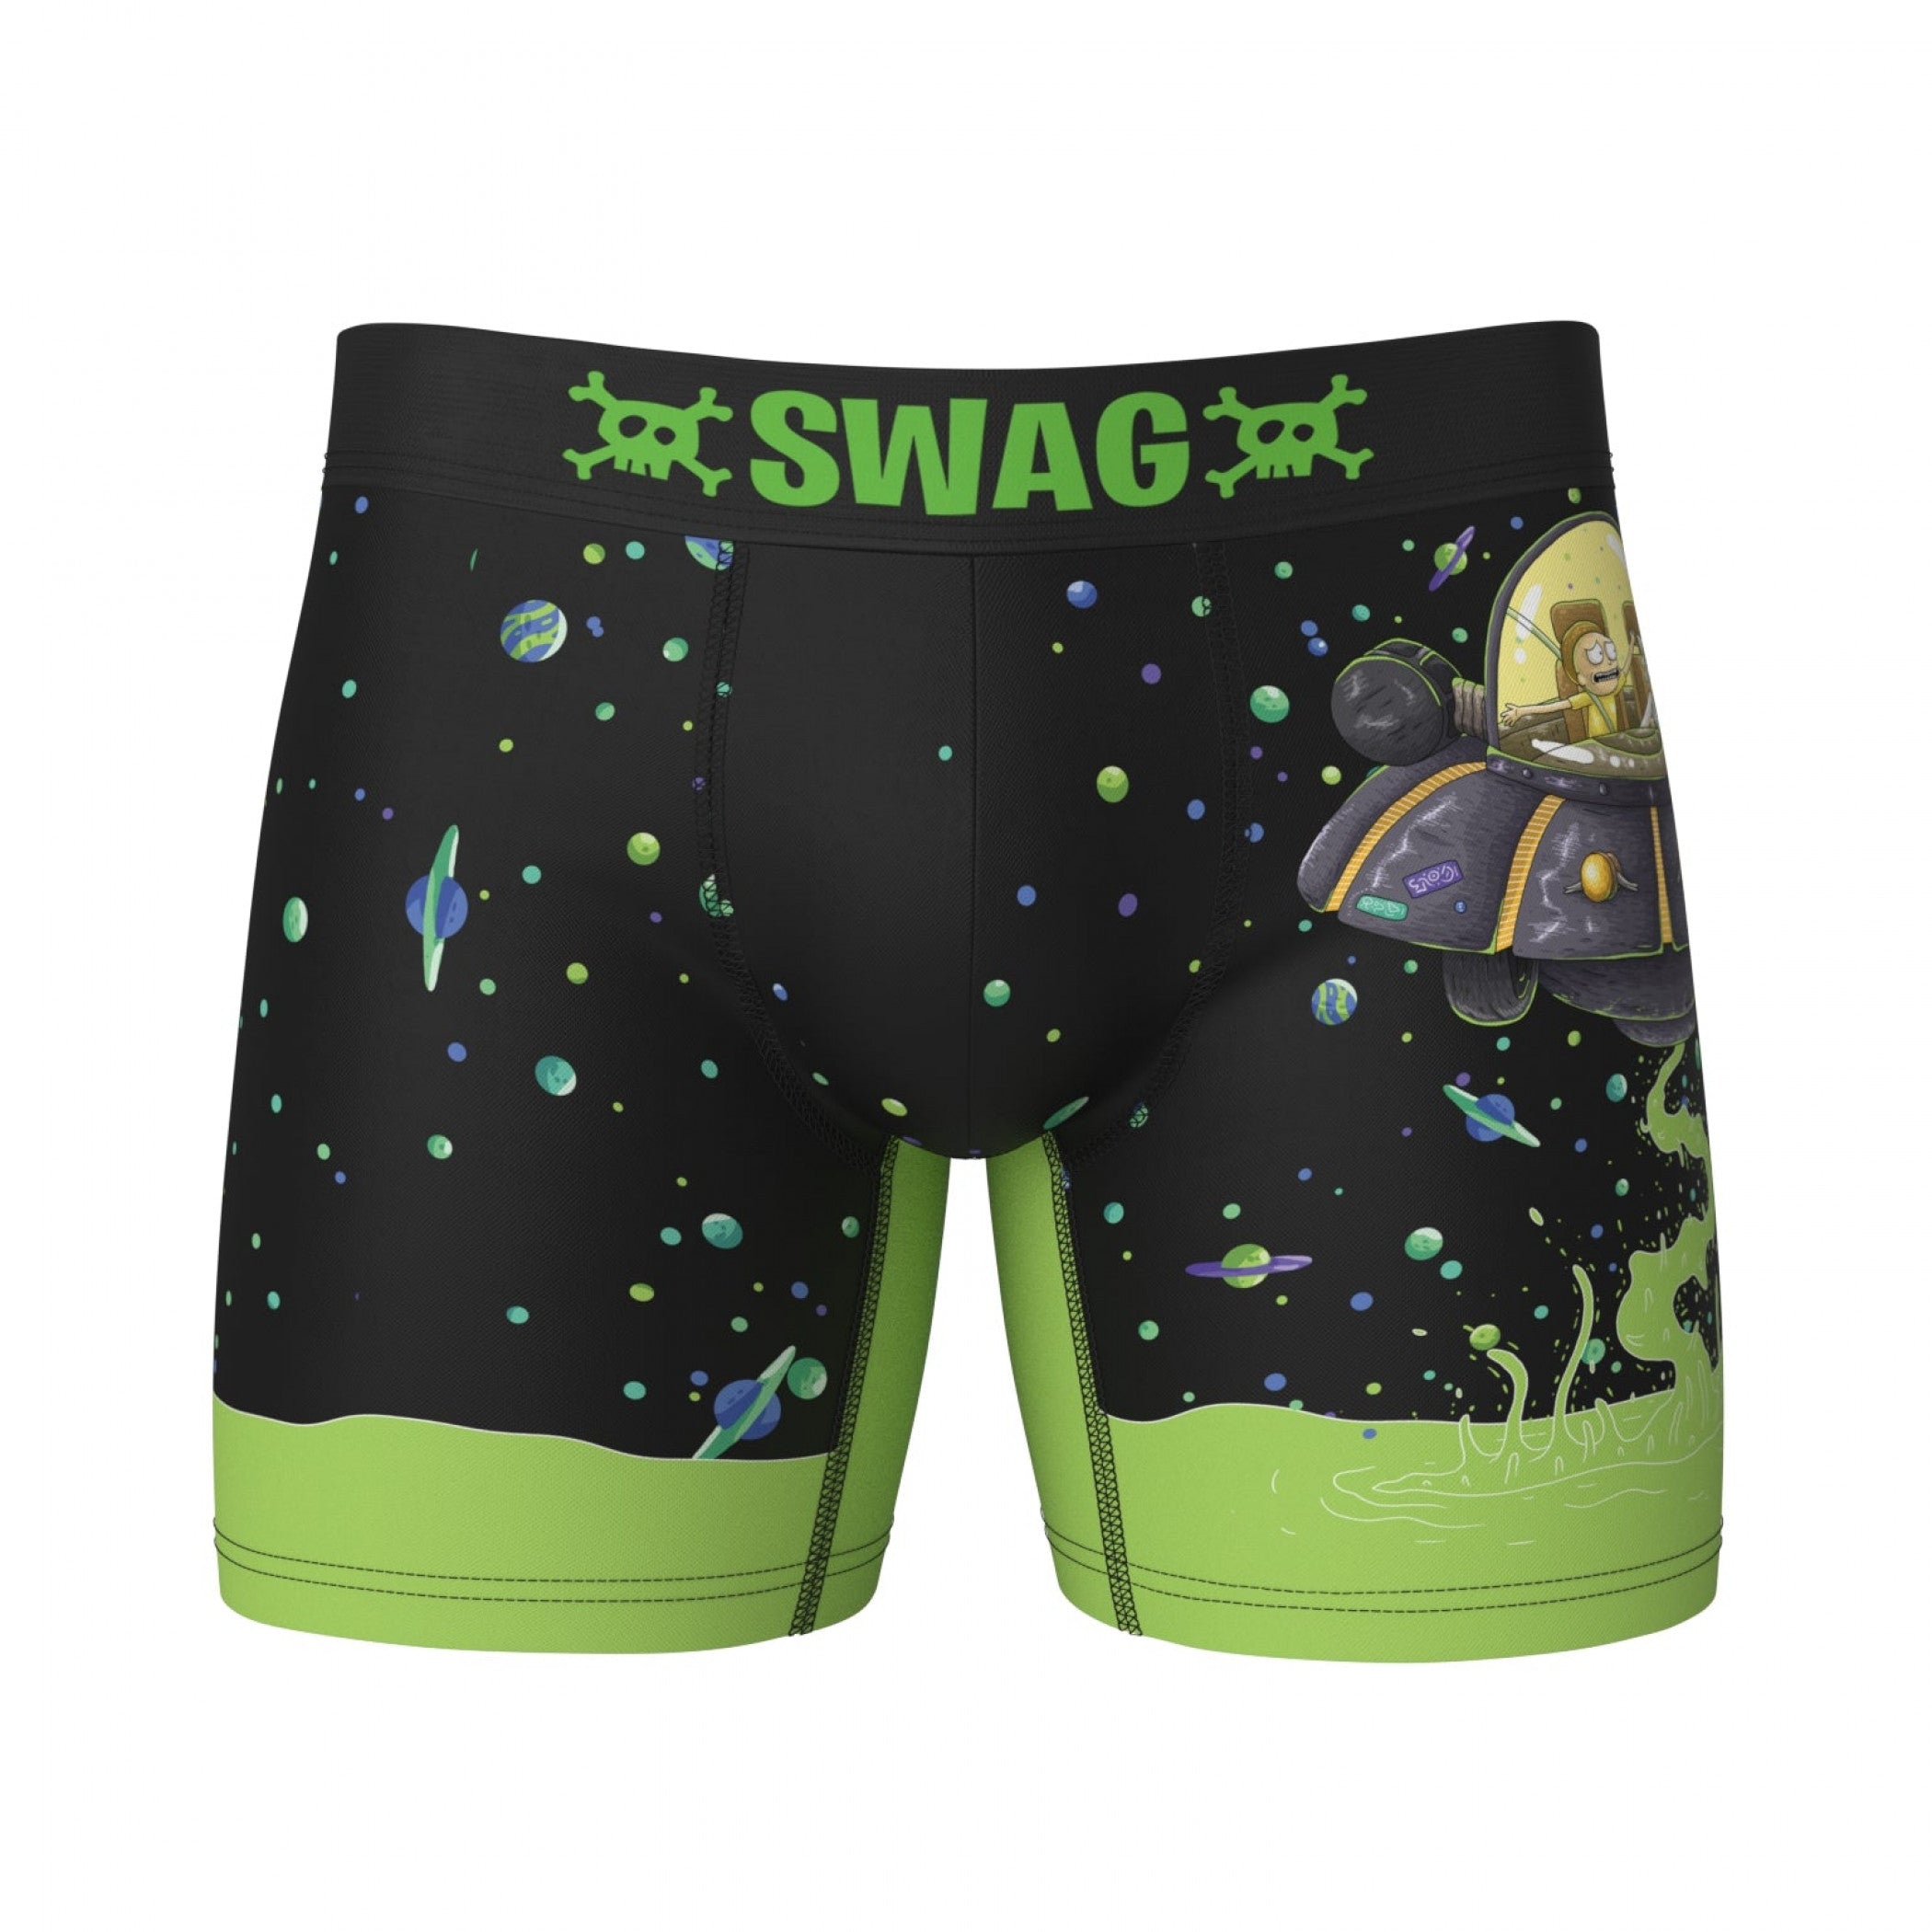 Dungeons and Dragons Swag Boxer Briefs-Medium (32-34) 